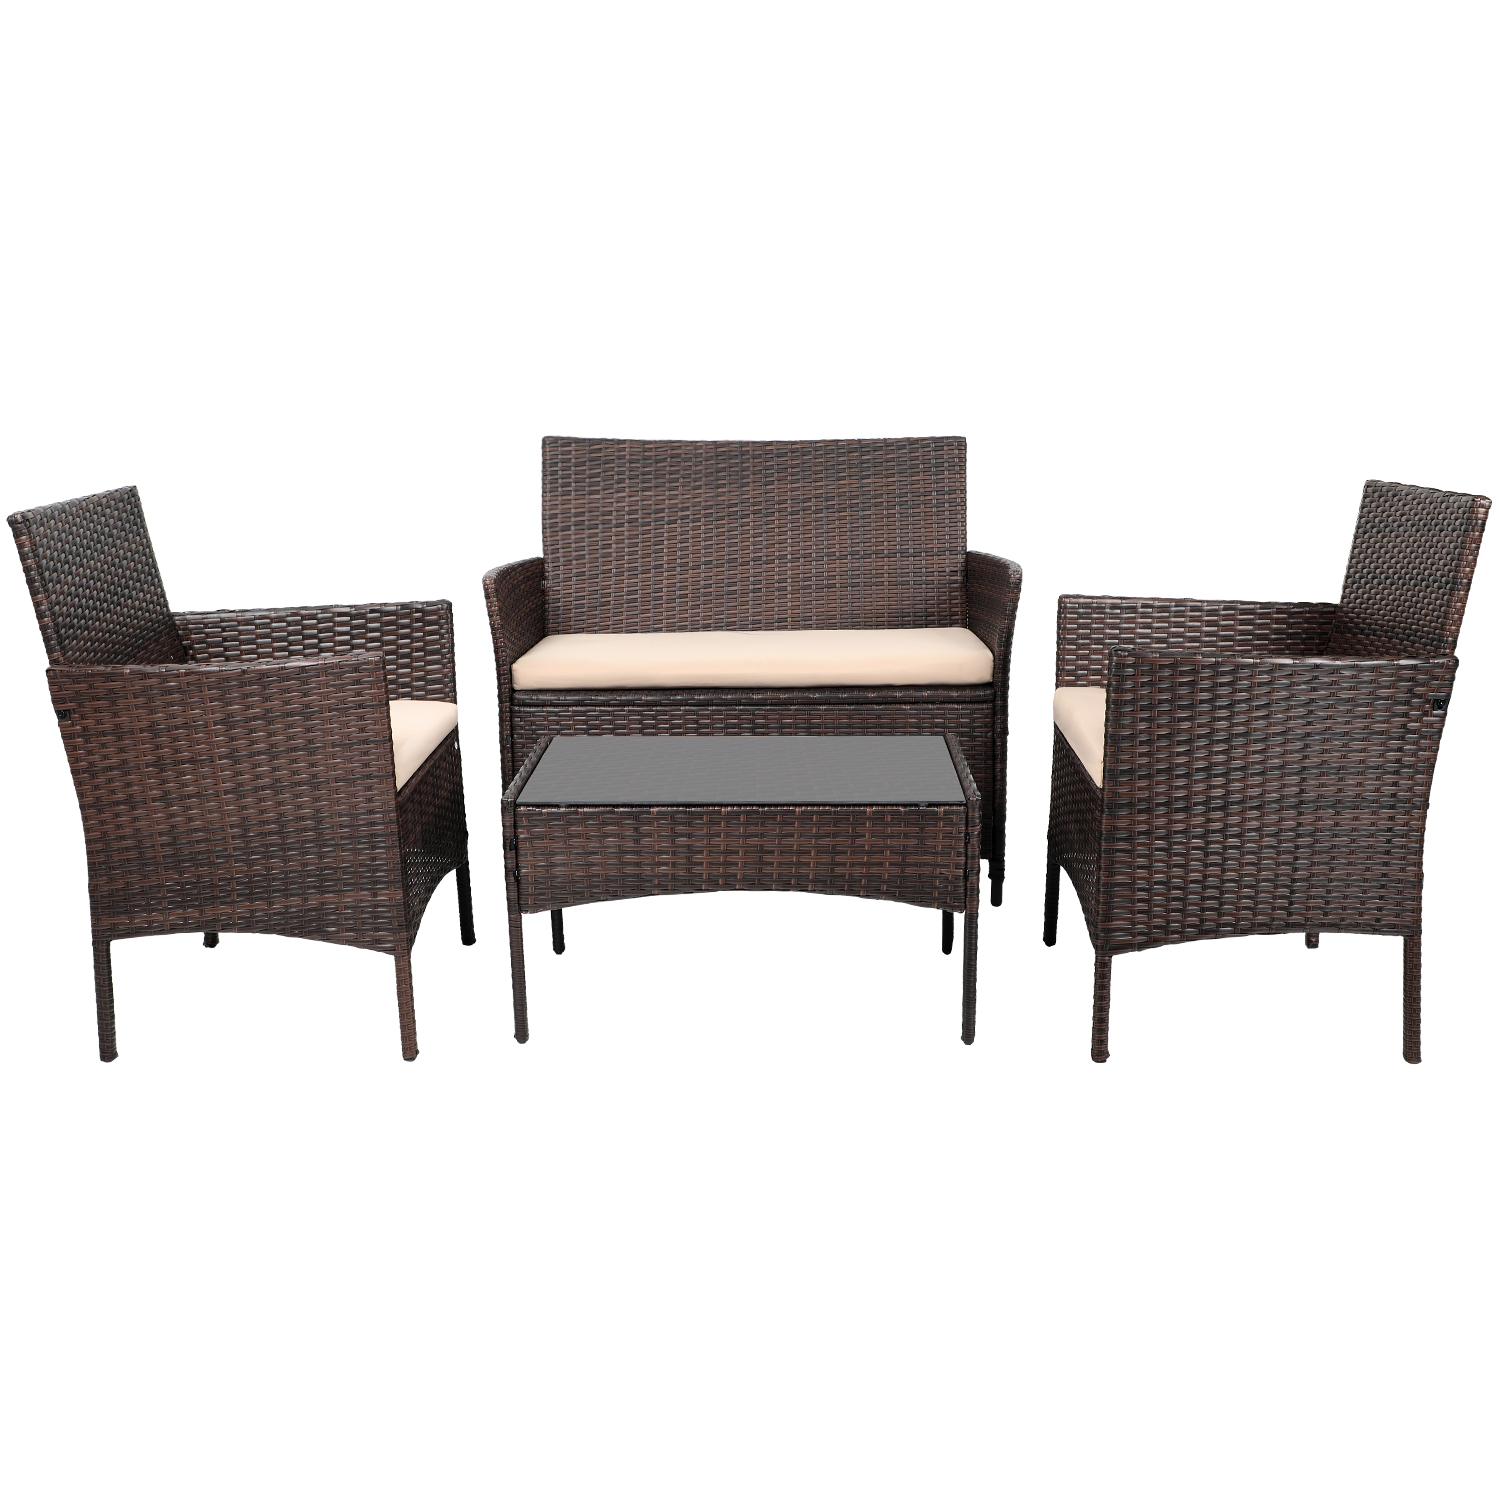 Lacoo 4 Pieces Outdoor Patio Furniture Sets Rattan Chair Wicker Set for Backyard Porch Garden Poolside Balcony - image 5 of 5